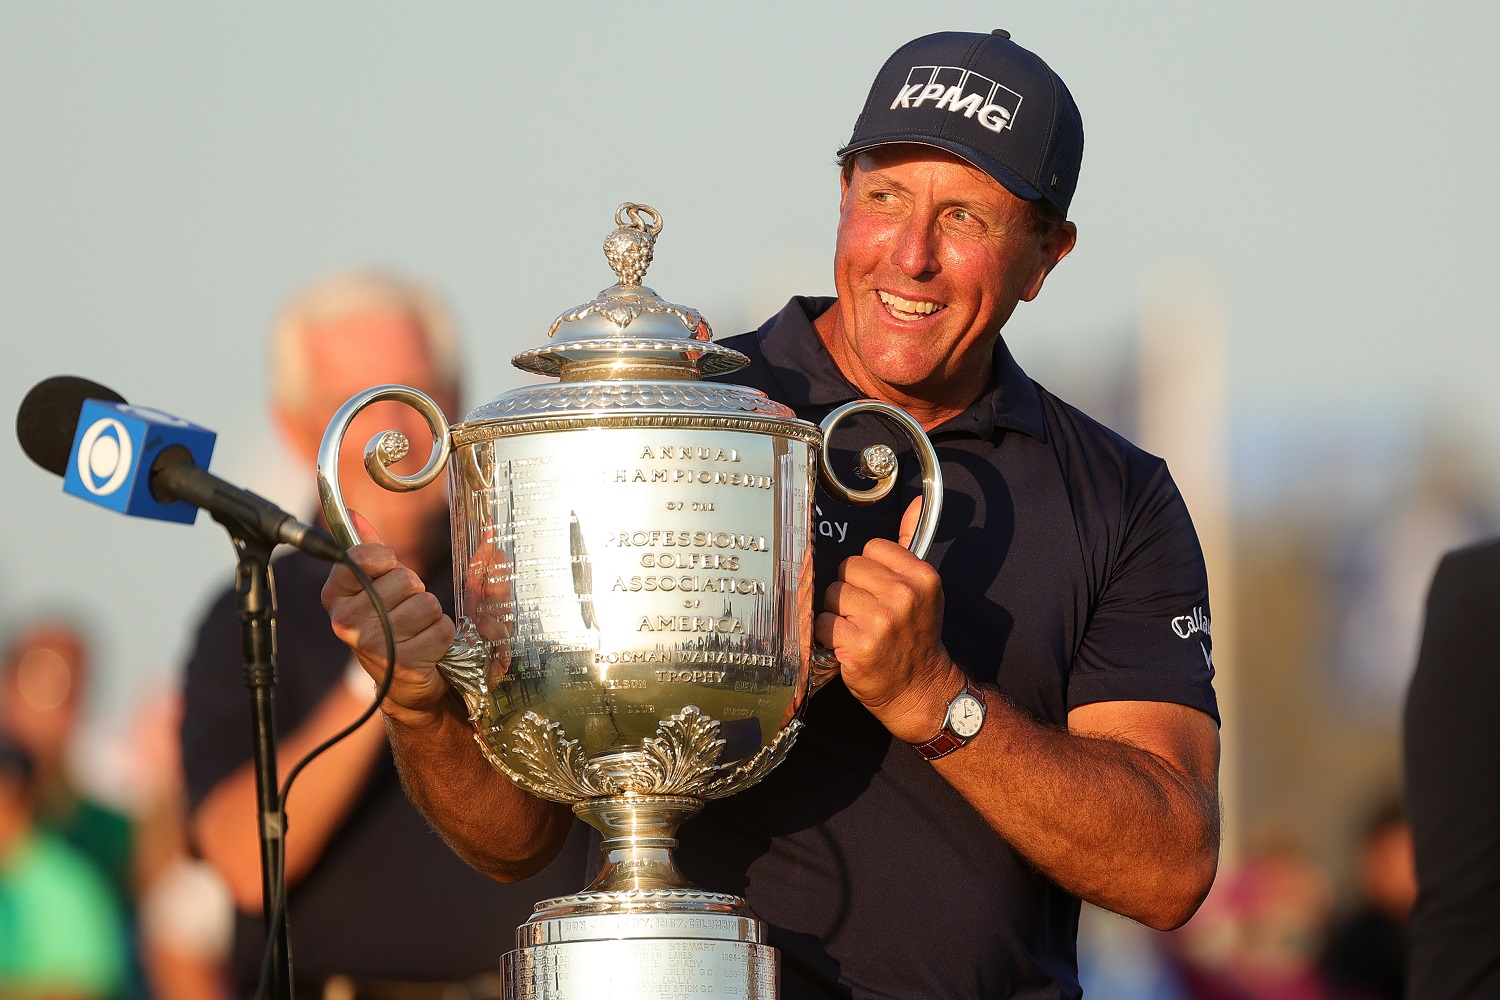 Phil Mickelson celebrates with the Wanamaker Trophy after winning the PGA Championship held at the Ocean Course of Kiawah Island Golf Resort in South Carolina. | Photo by Stacy Revere/Getty Images